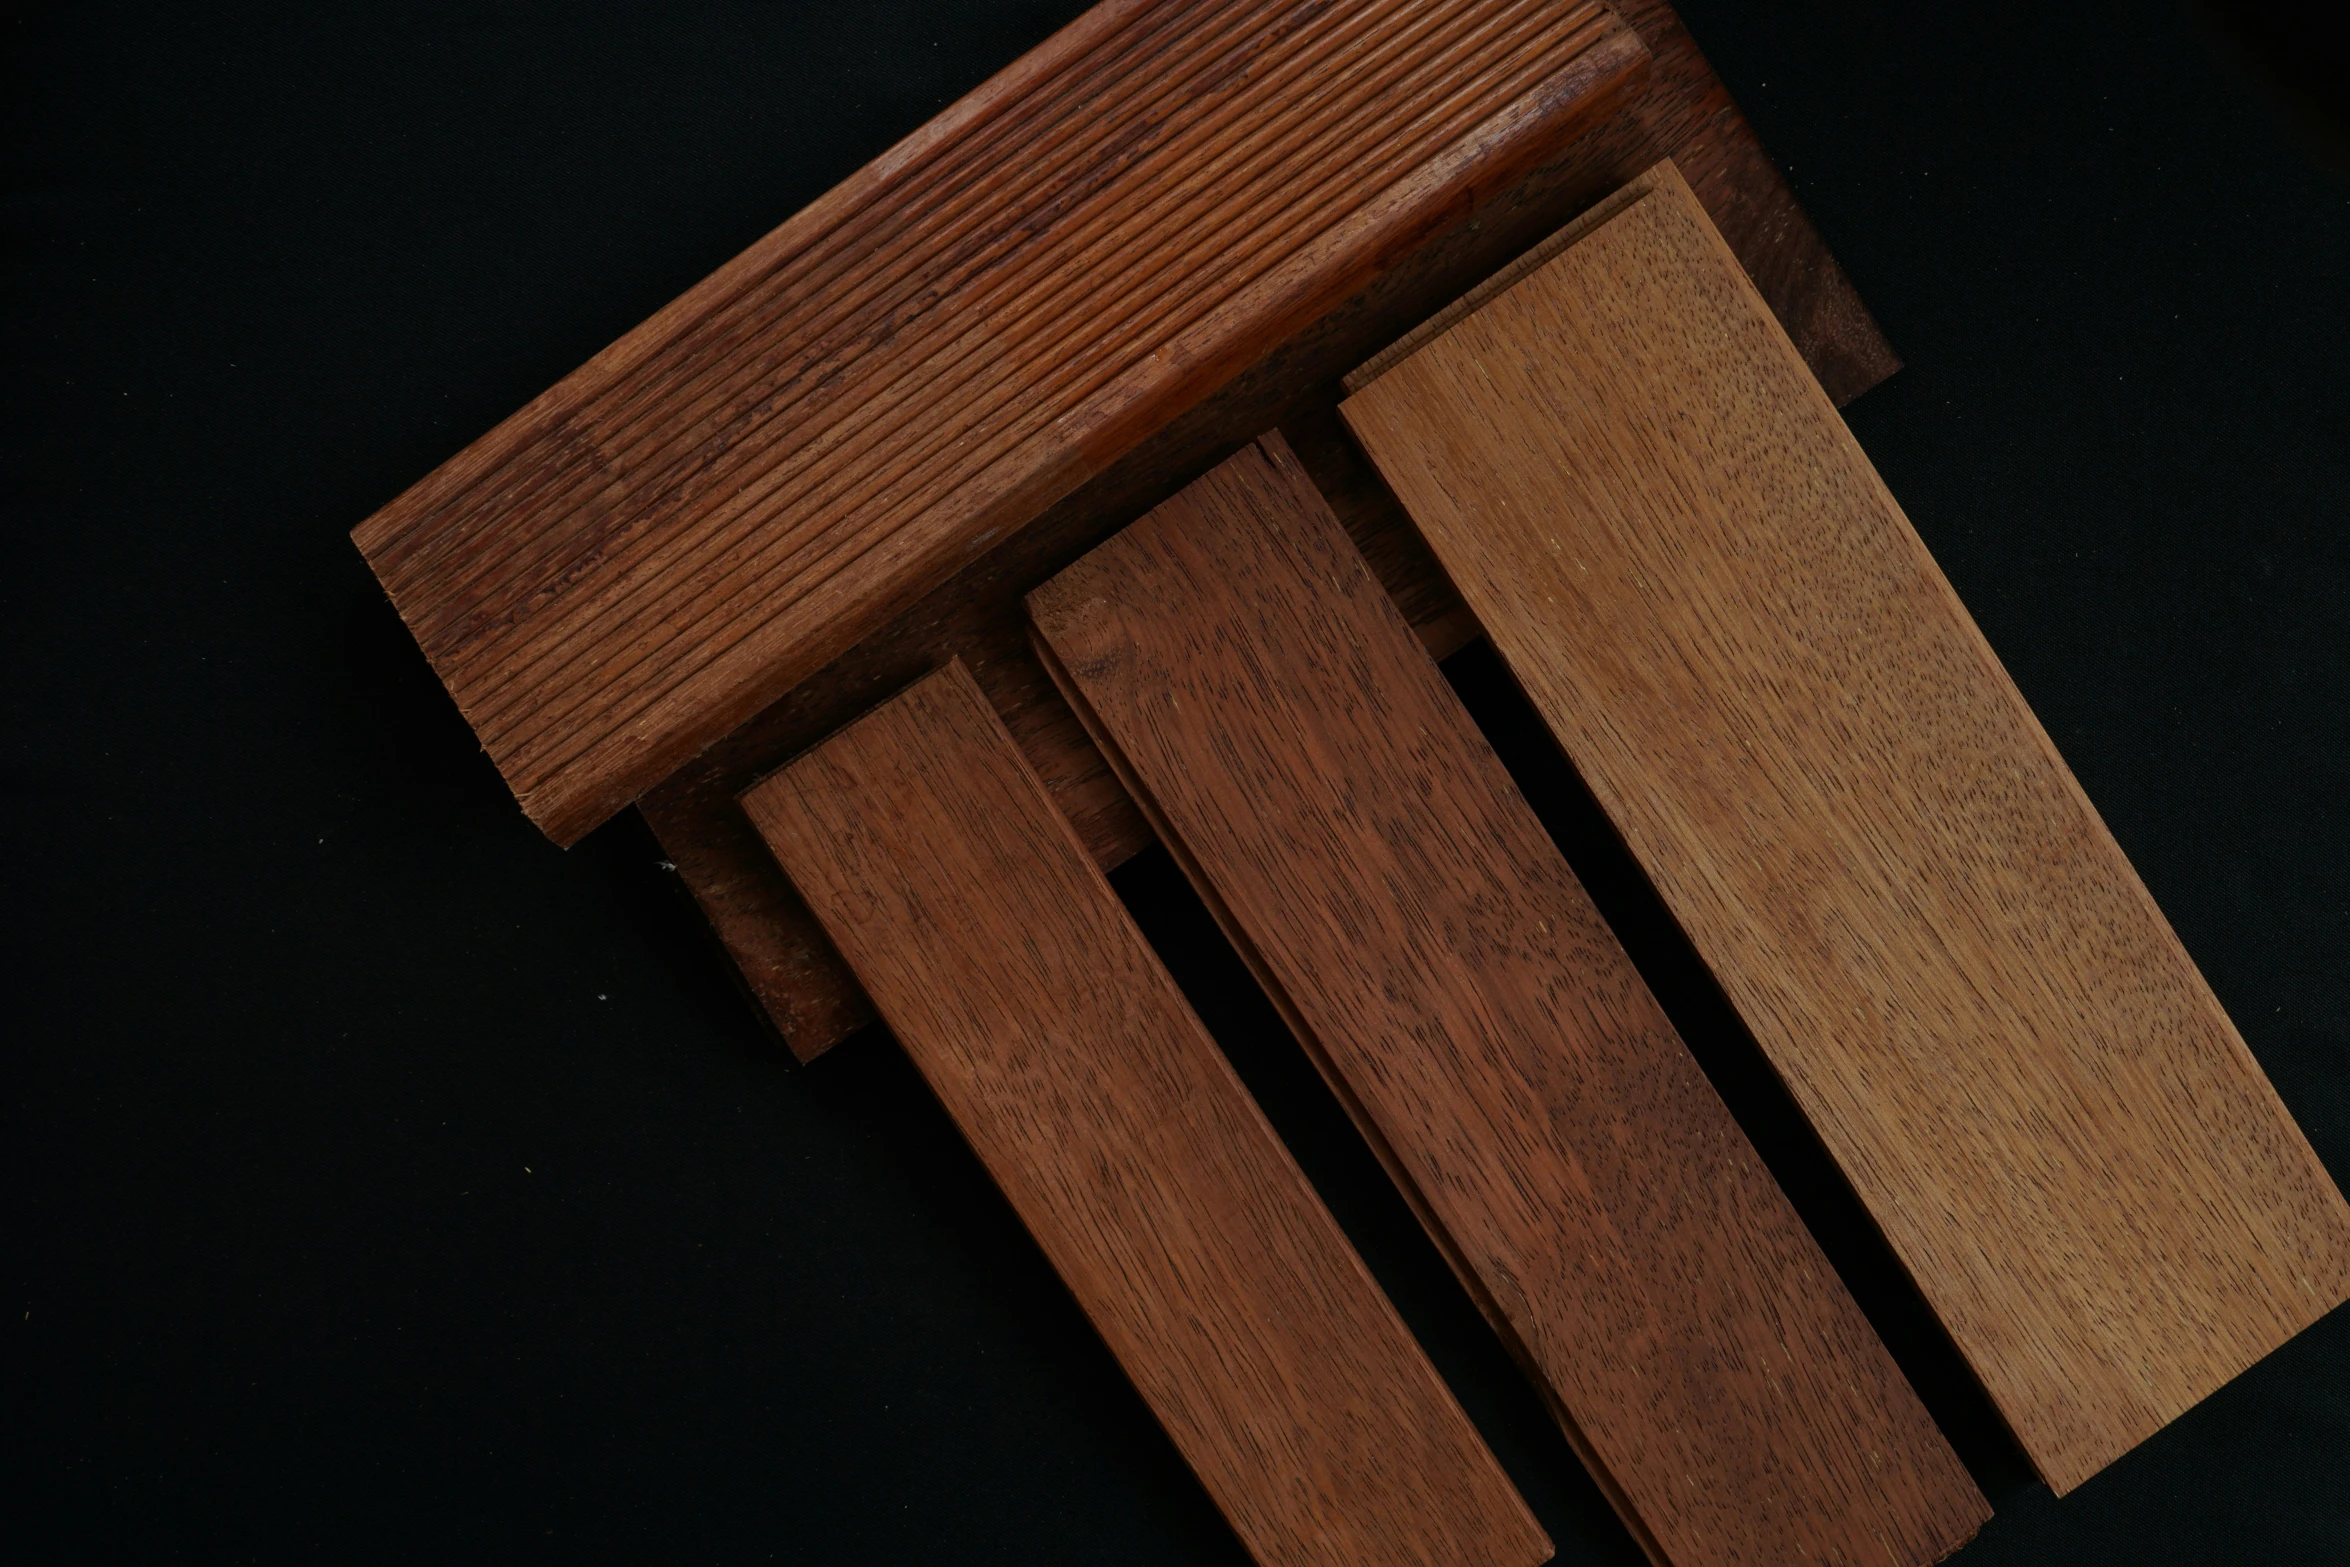 a close - up view of the side pieces of a wooden chair